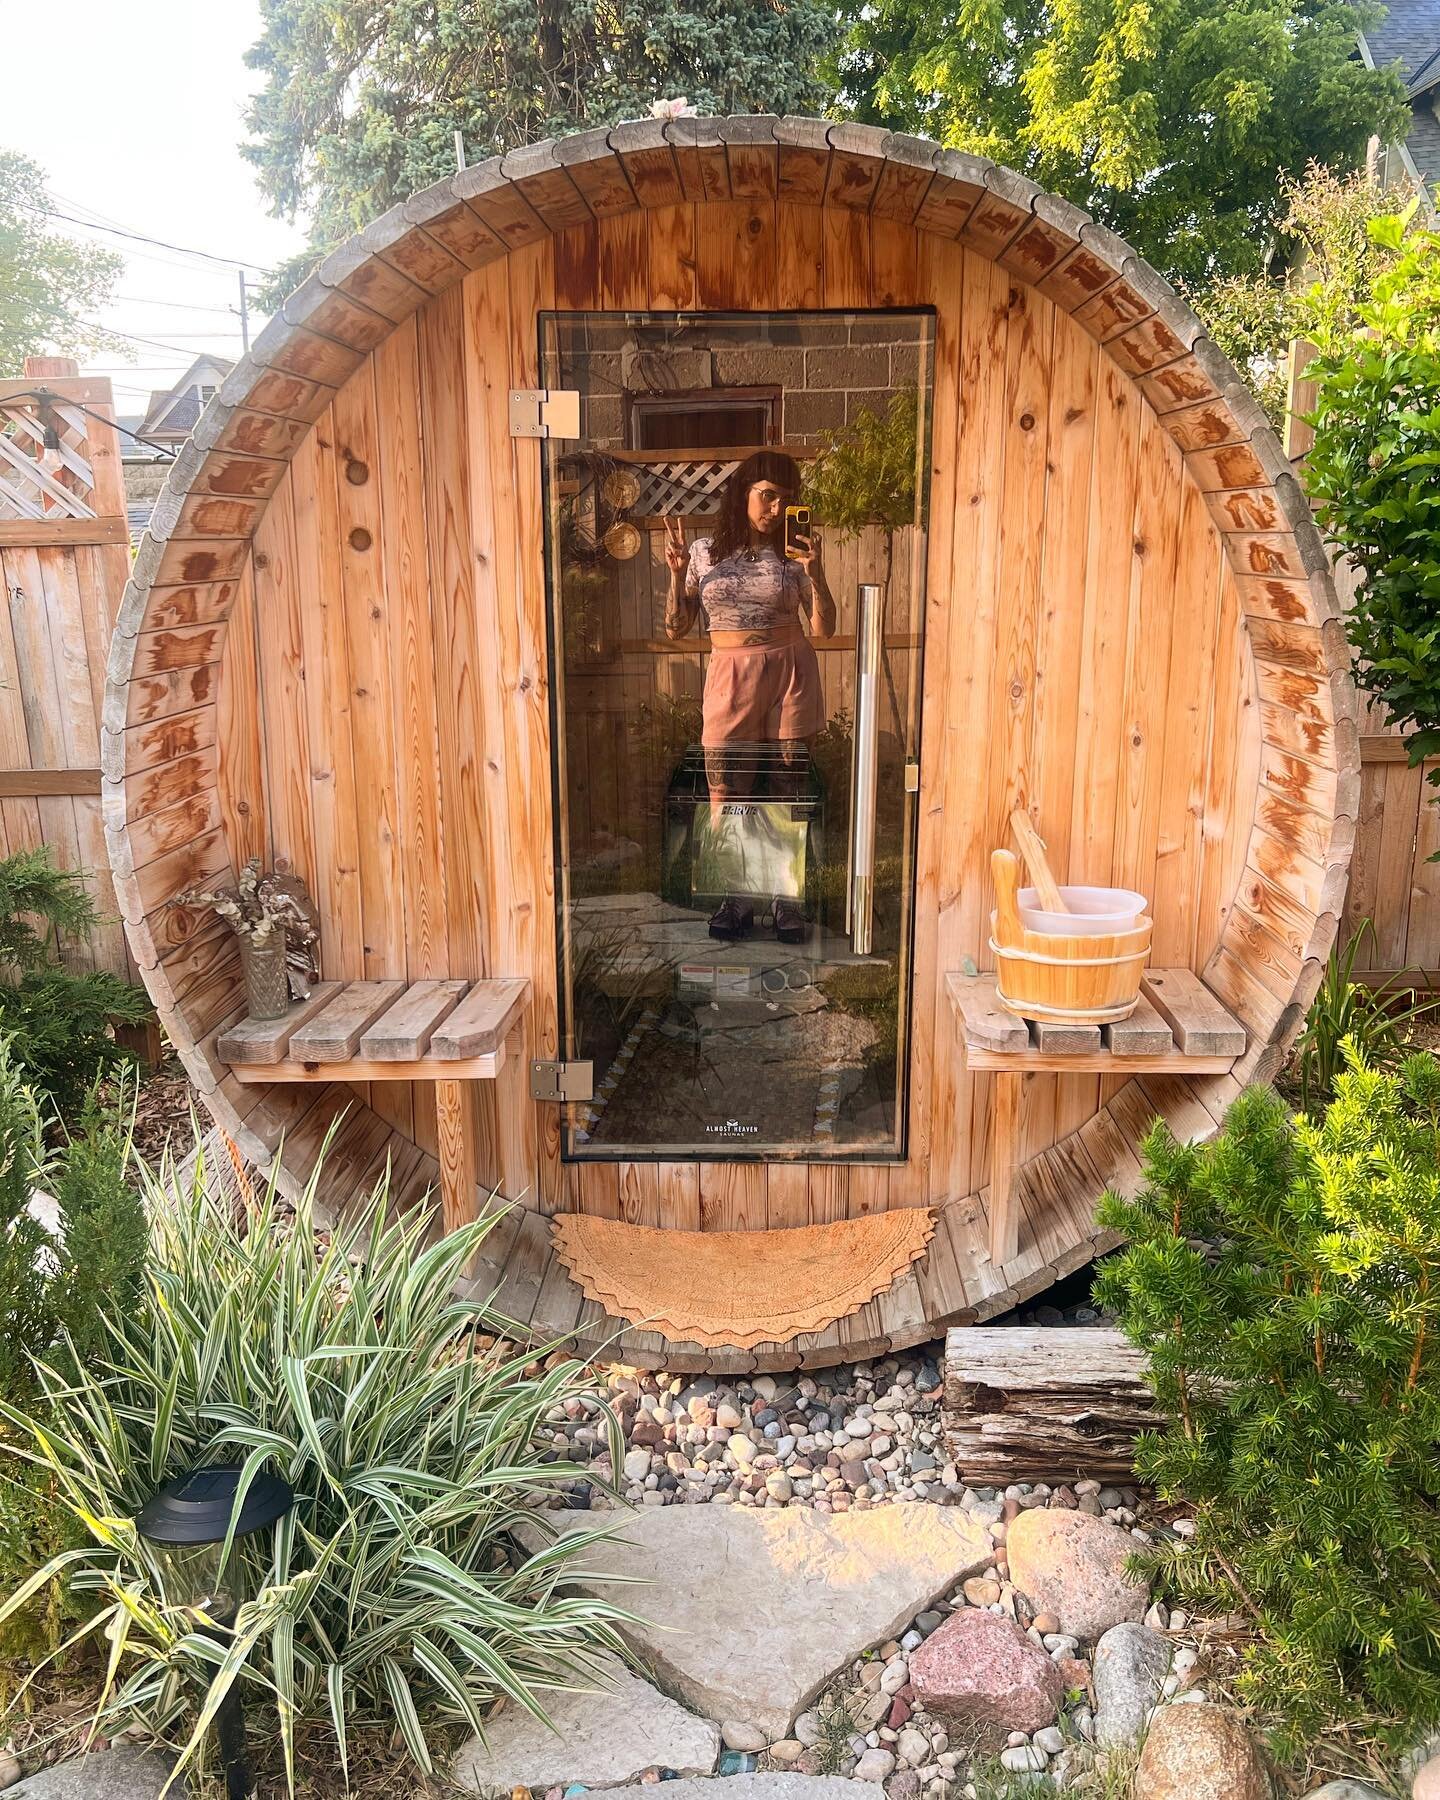 Come to Mother Lion and enter the wellness womb of the steamy sauna. 

The meeting place of the elements; water, fire, earth, air, and spirit swirling around and steeping you with healing heat.